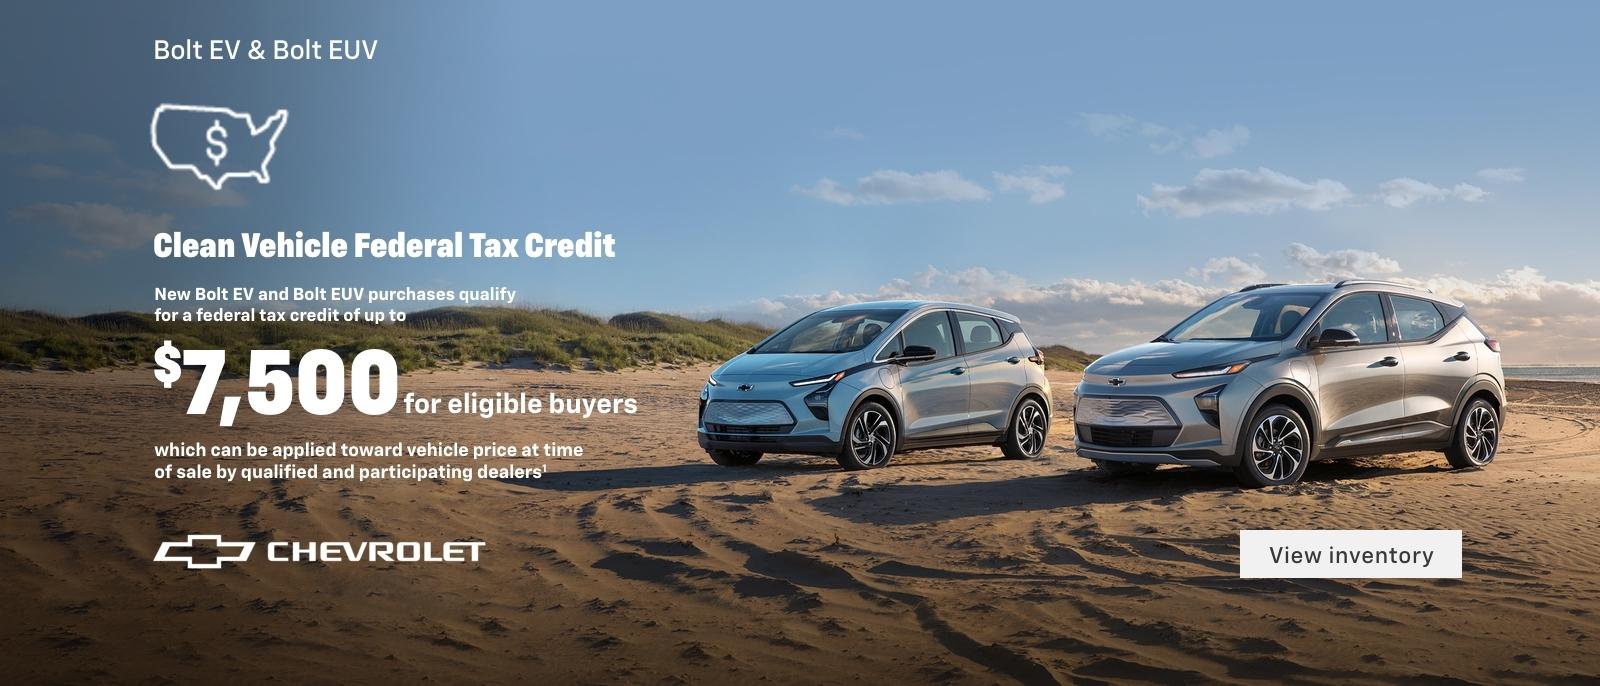 New Bolt EV and EUV purchases qualify for a federal tax credit of up to $7,500 for eligible buyers, which can be applied toward vehicle price at time of sale by qualified and participating dealers.